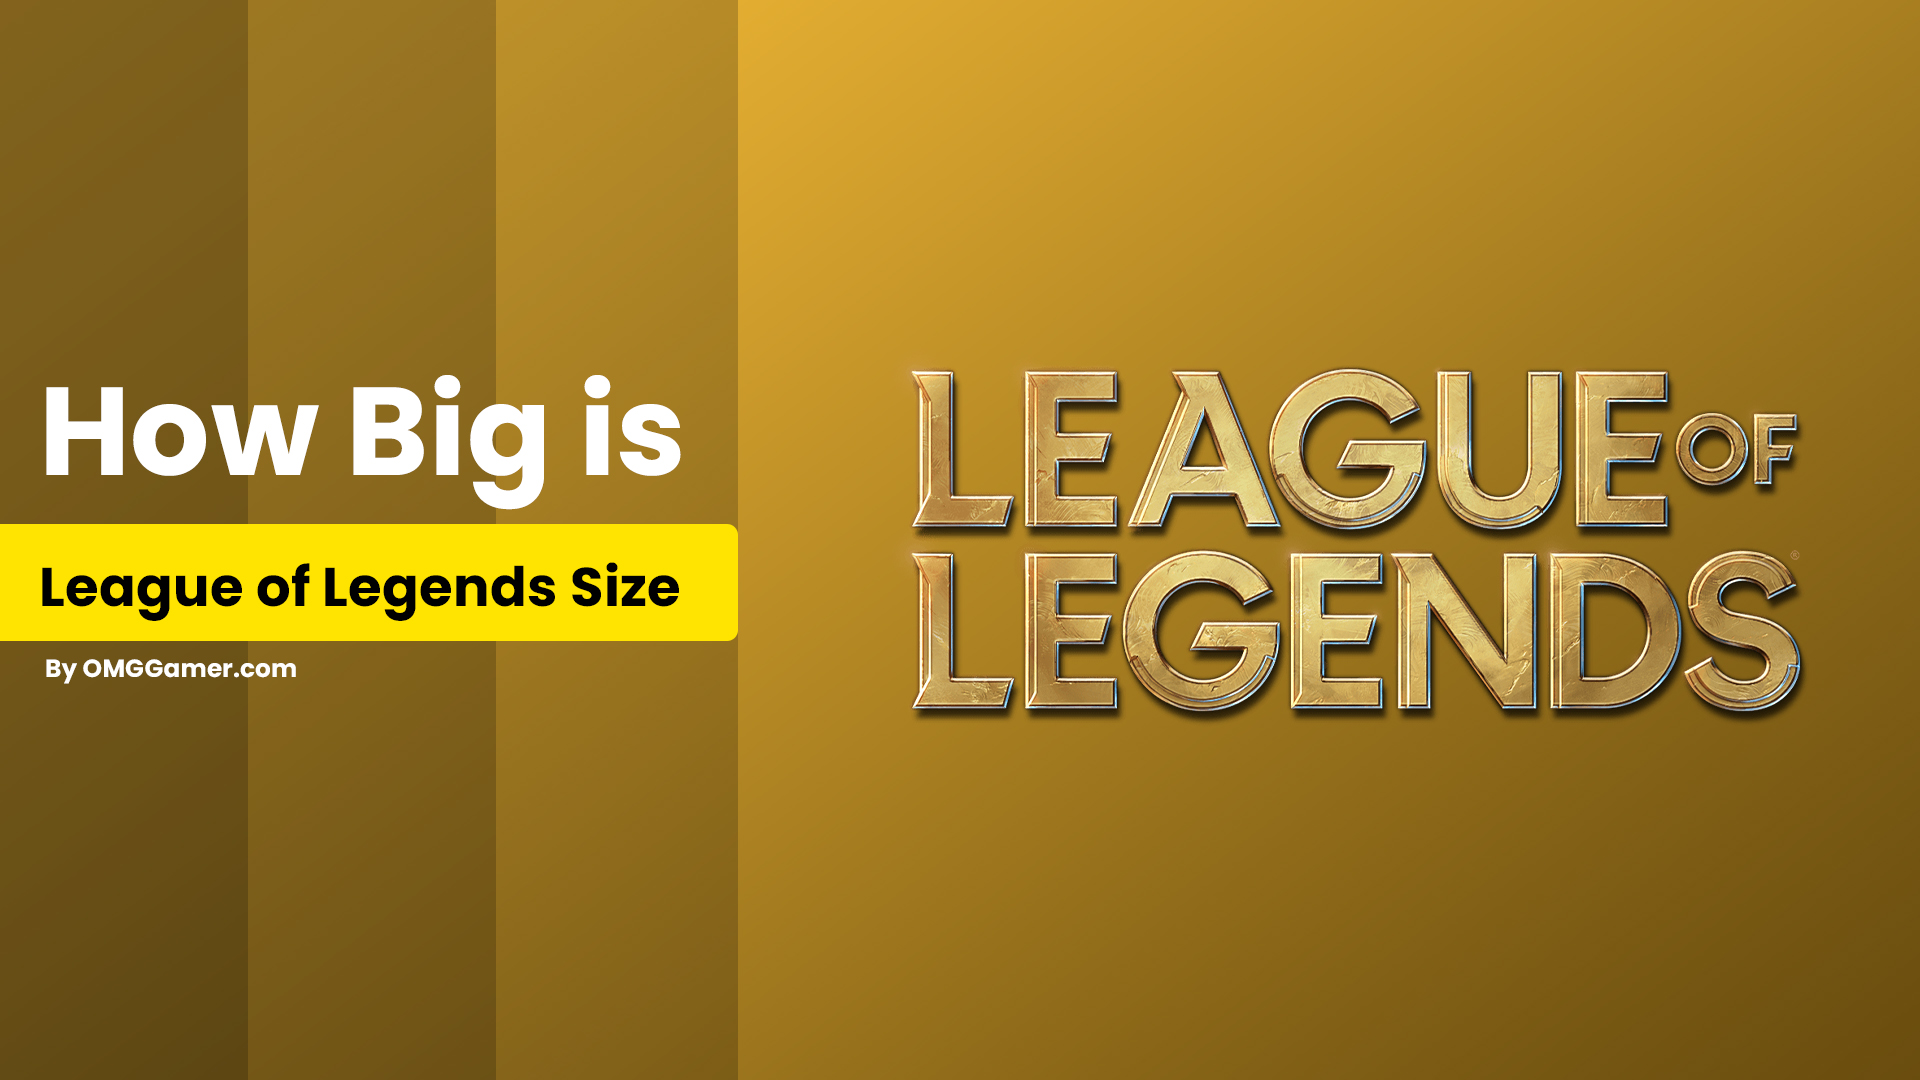 How Big is League of Legends File Size